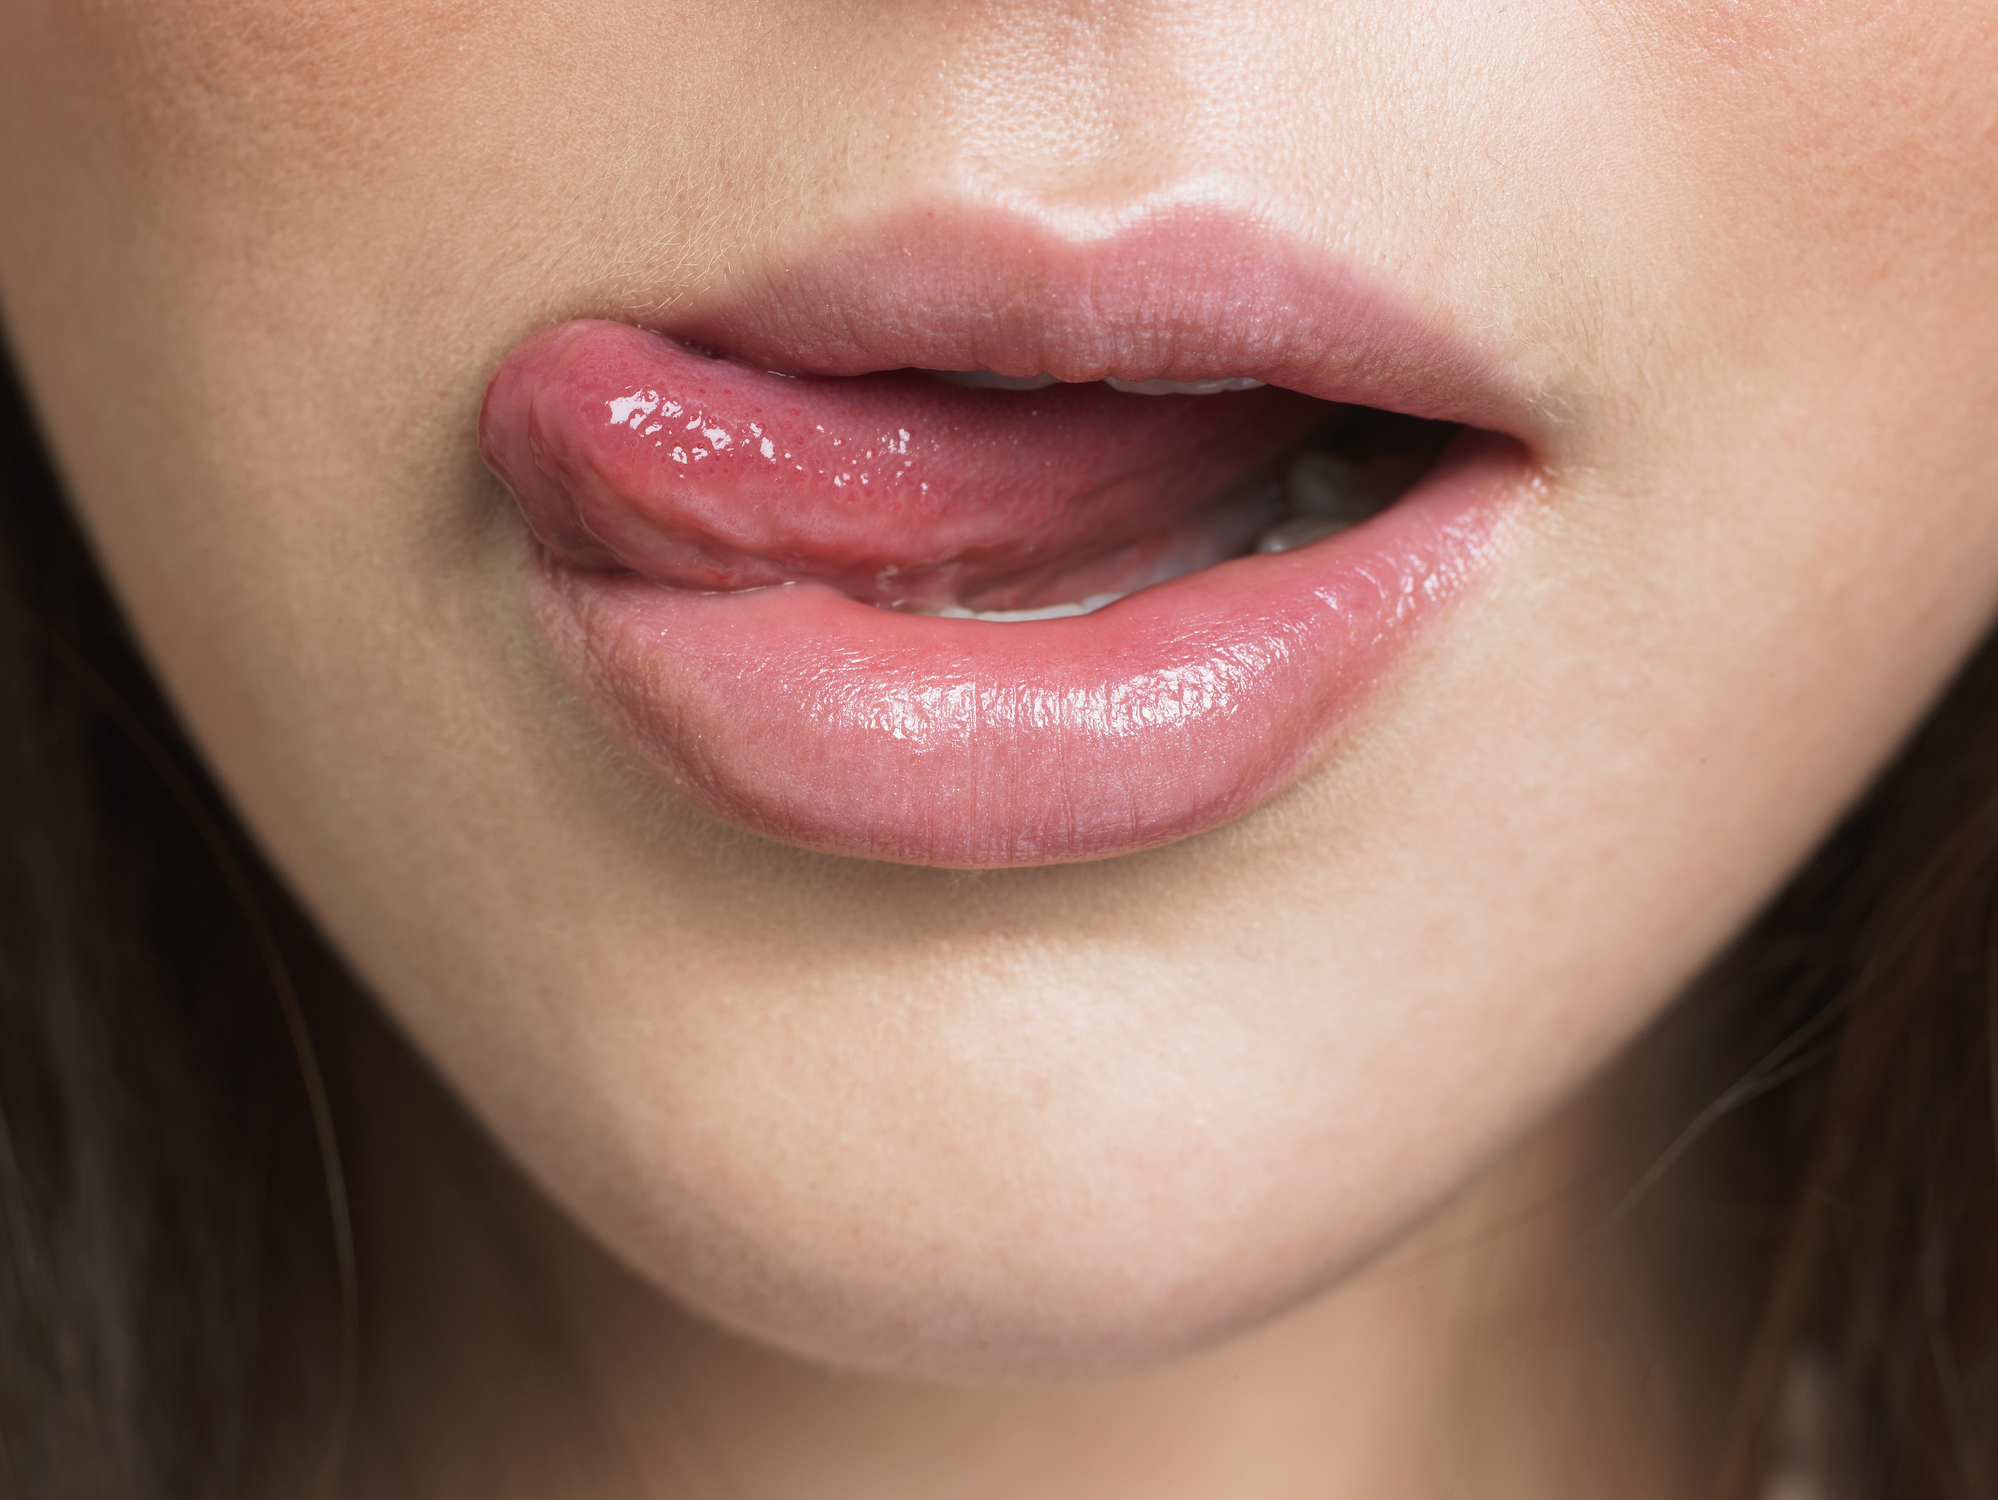 Close-up of a person sticking out their tongue slightly between their lips